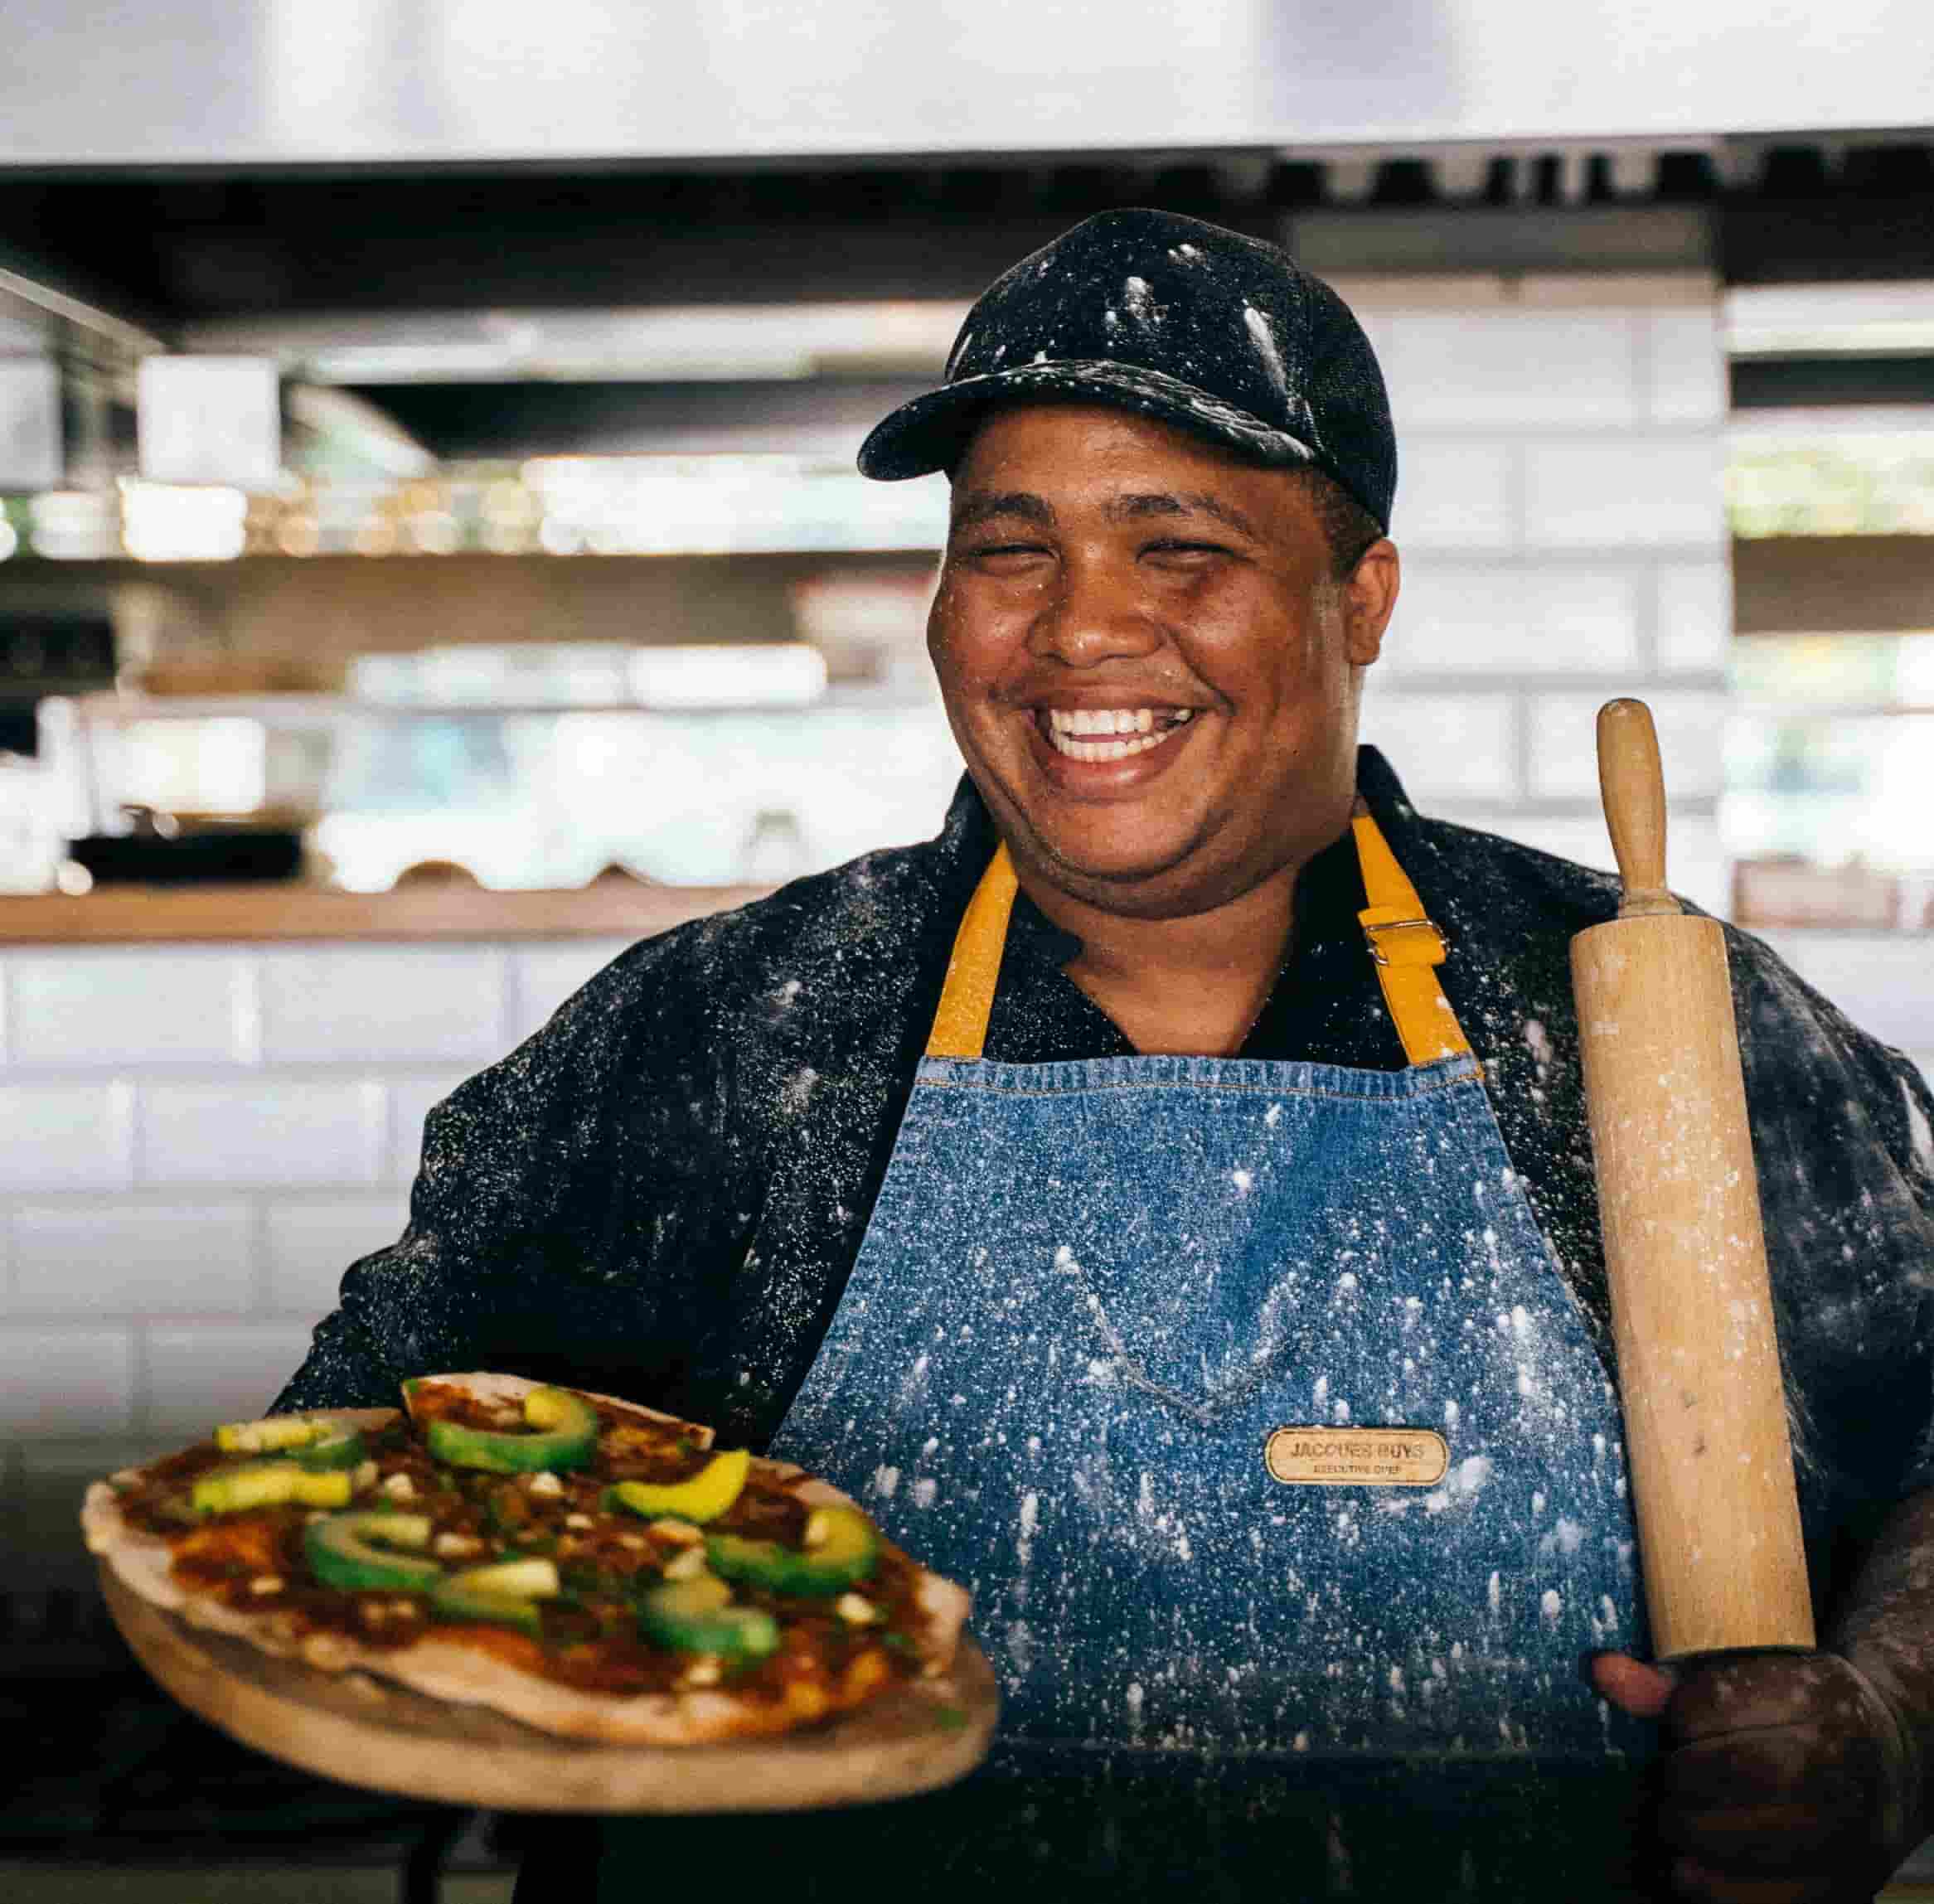 Male chef with blue apron holding a pizza and a rolling pin